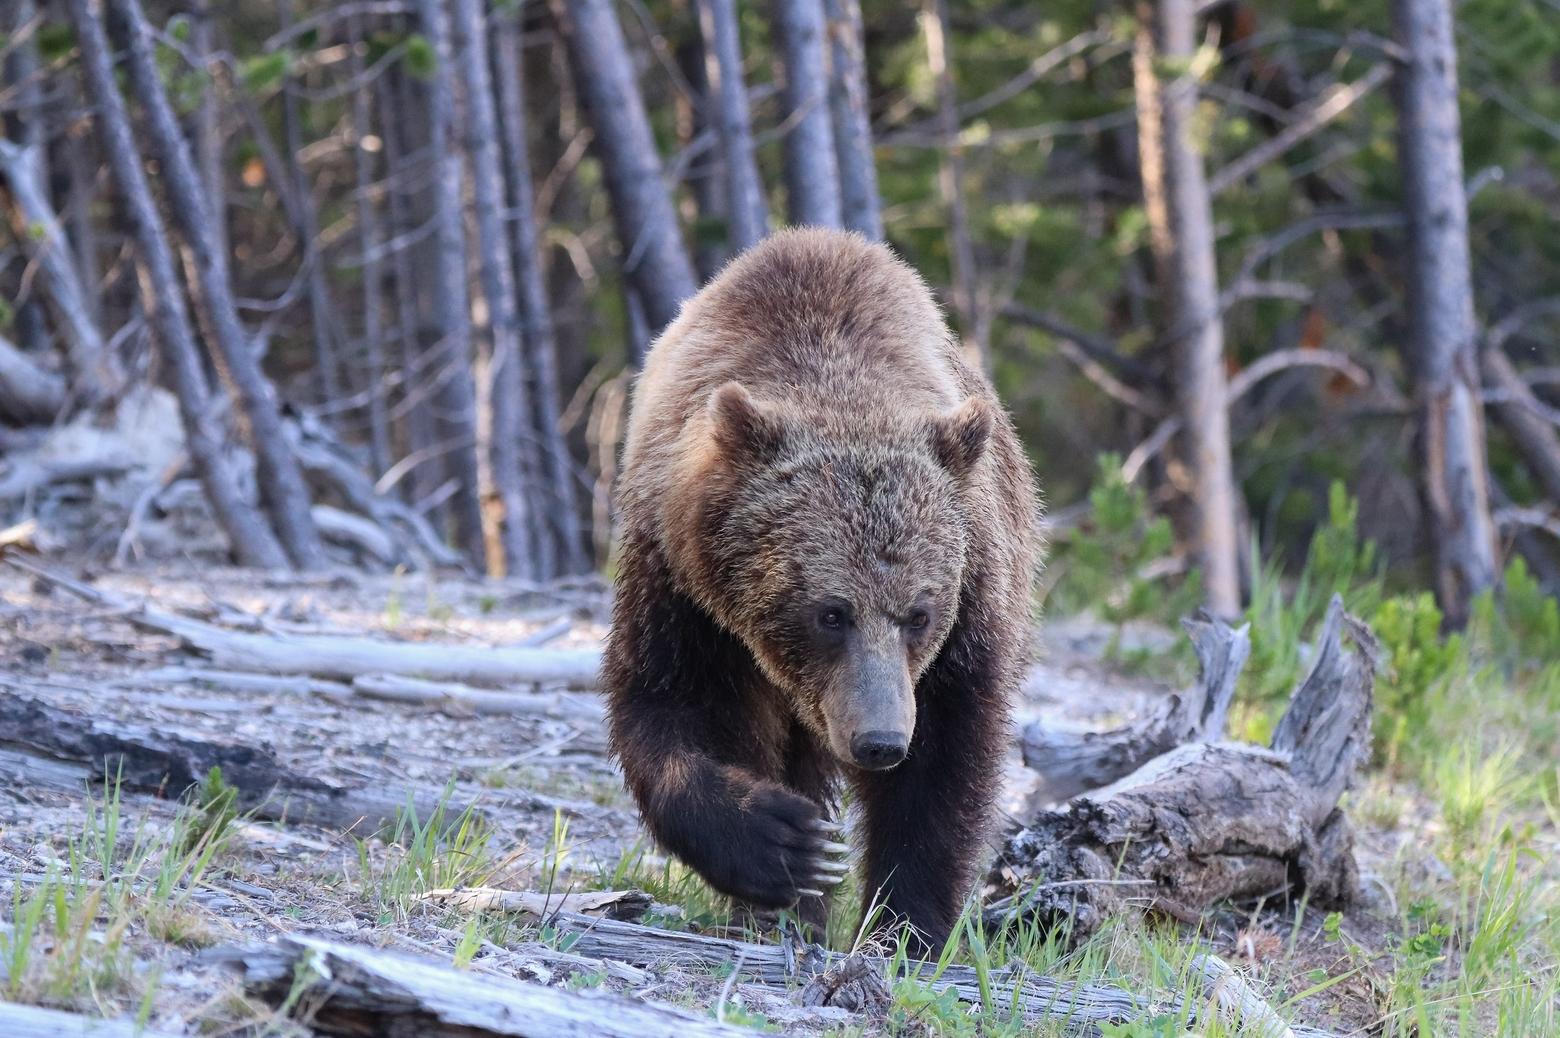 As grizzly bears emerge in Greater Yellowstone, the U.S. Interior Department announced it plans to restore grizzlies to the North Cascades, according to a recent statement. "The last confirmed sighting of a grizzly bear in the U.S. portion of the North Cascades ecosystem was in 1996," the statement said. Photo by Addy Falgoust/NPS 